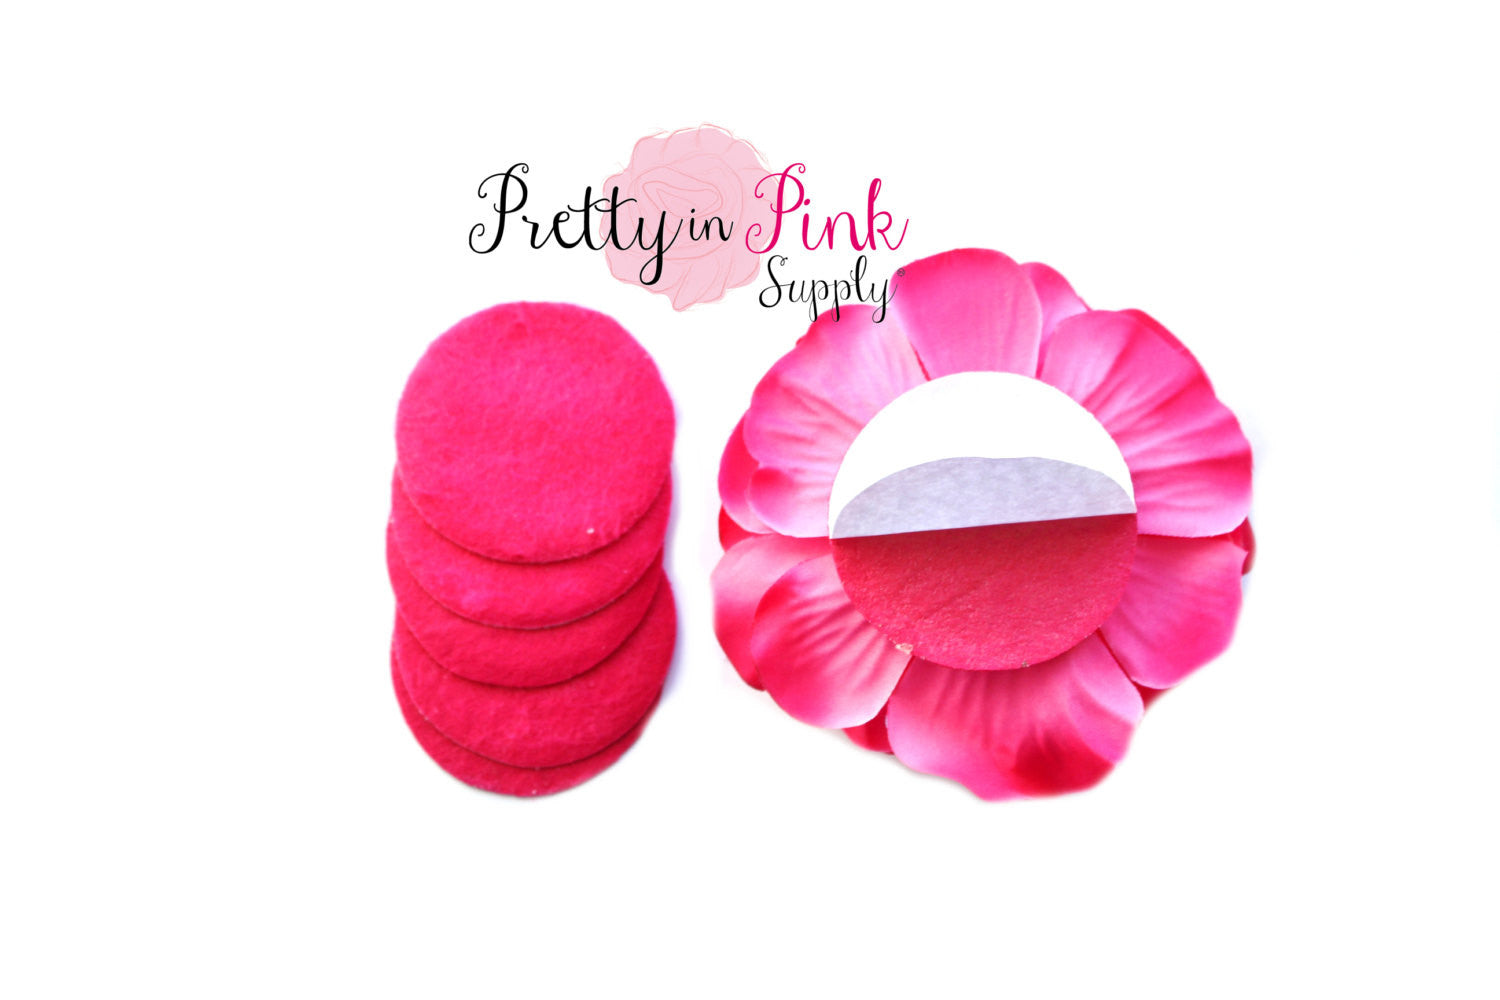 Large 2" Hot Pink Felt Circles- Self Adhesive - Pretty in Pink Supply